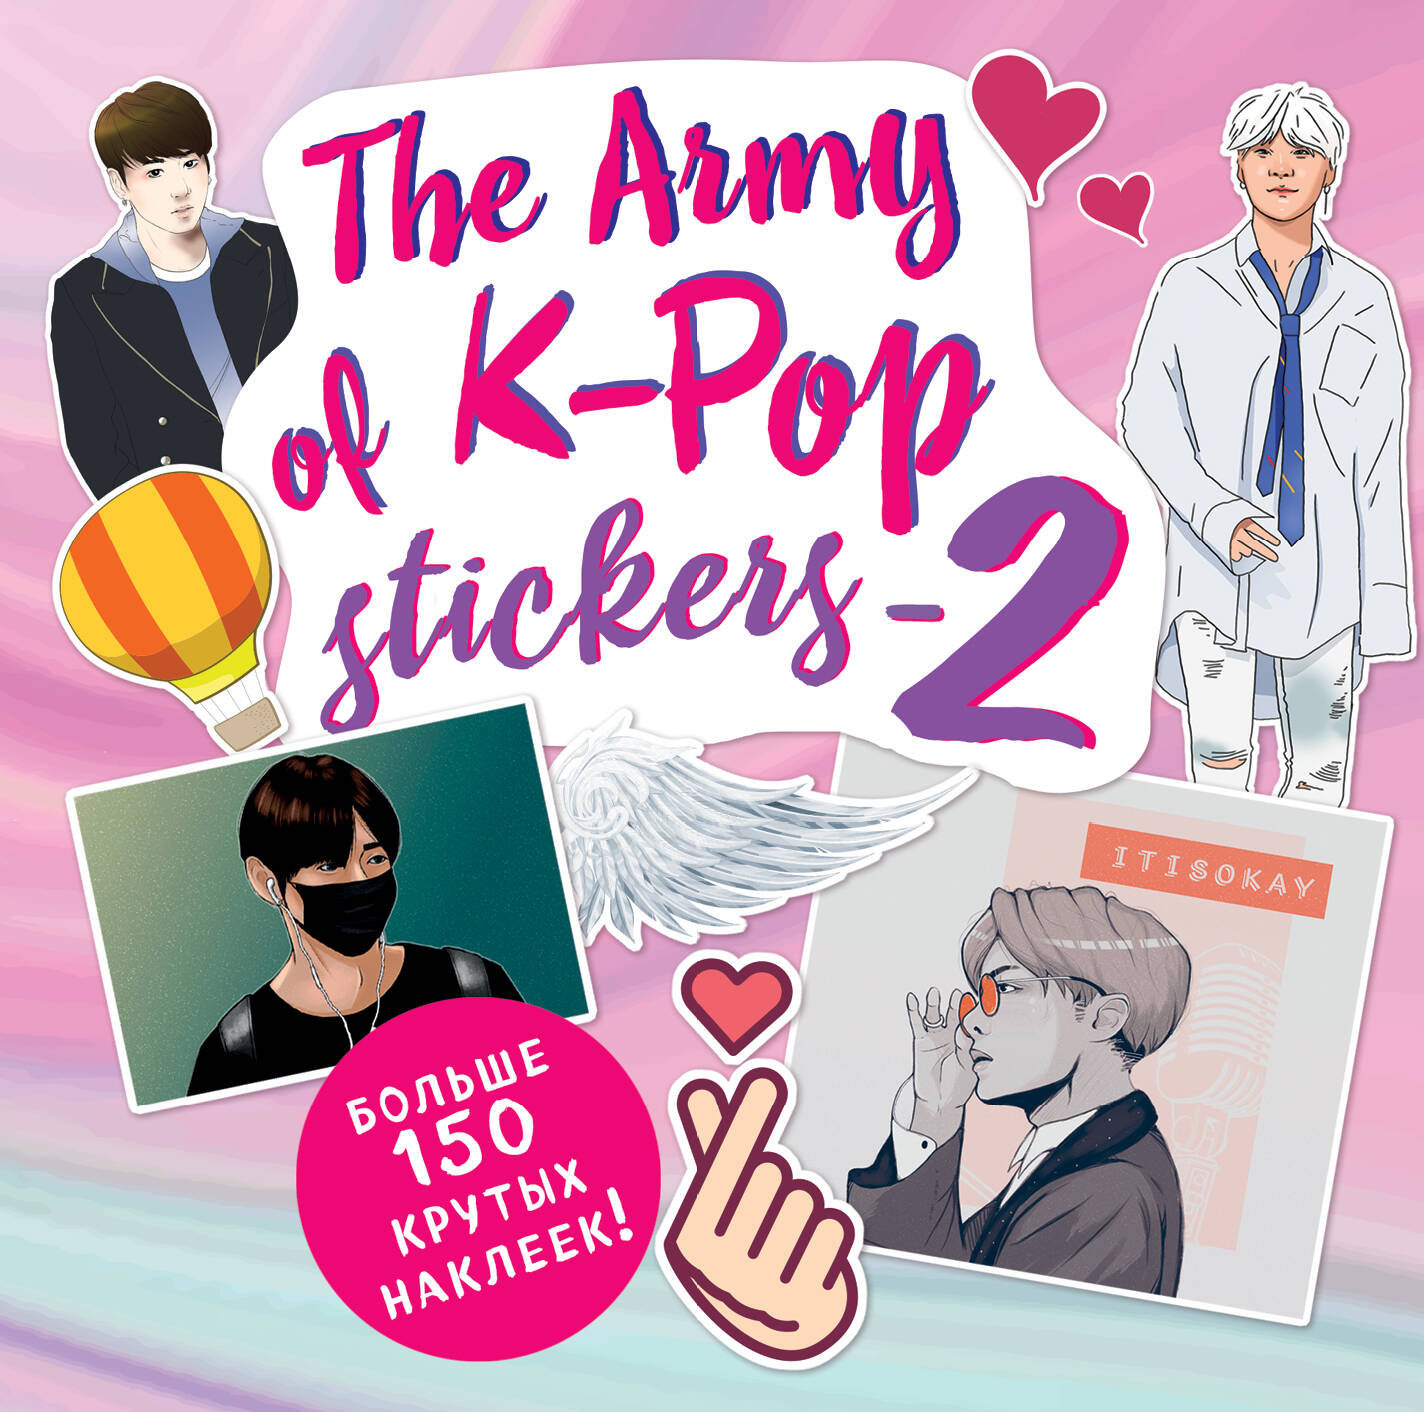 The ARMY of K-POP stickers - 2.  150  !